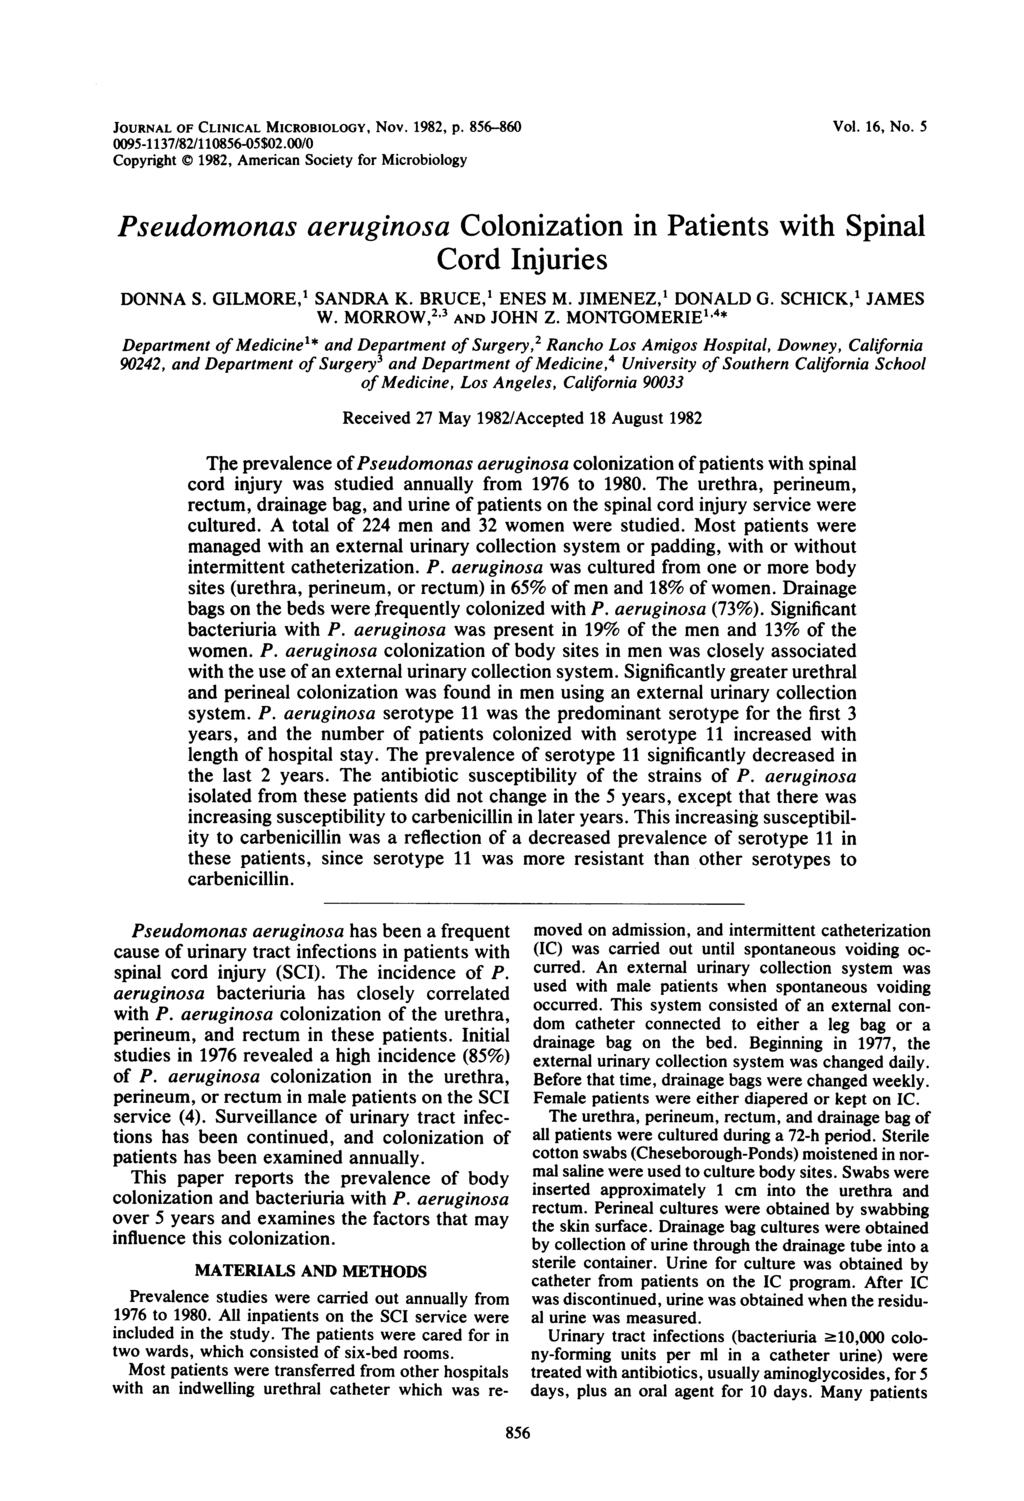 JOURNAL OF CLINICAL MICROBIOLOGY, Nov. 1982, P. 856-860 0095-1137/82/110856-05$02.00/0 Copyright 1982, Americn Society for Microbiology Vol. 16, No.